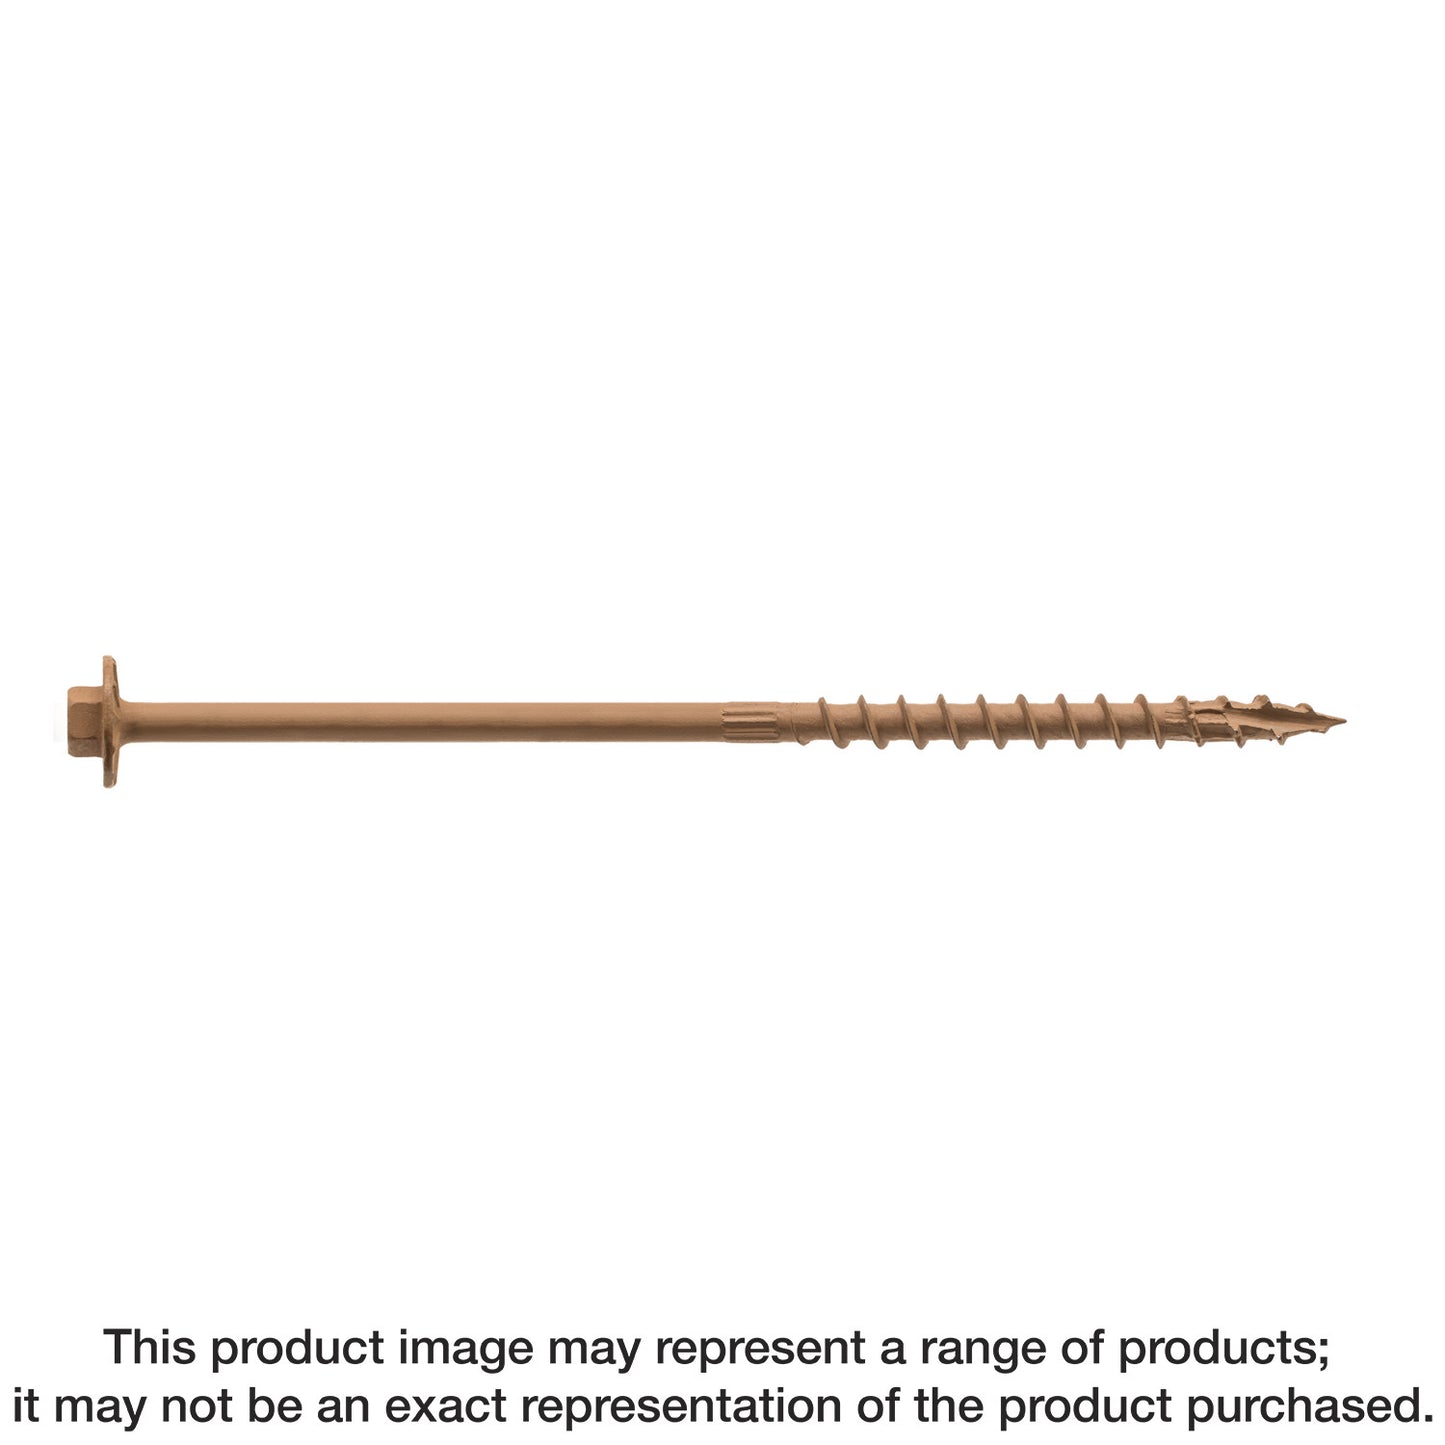 Strong-Drive® SDWH TIMBER-HEX SS Screw - 0.188 in. x 6 in. 5/16 Hex, Type 316 (10-Qty) (Pack of 6)